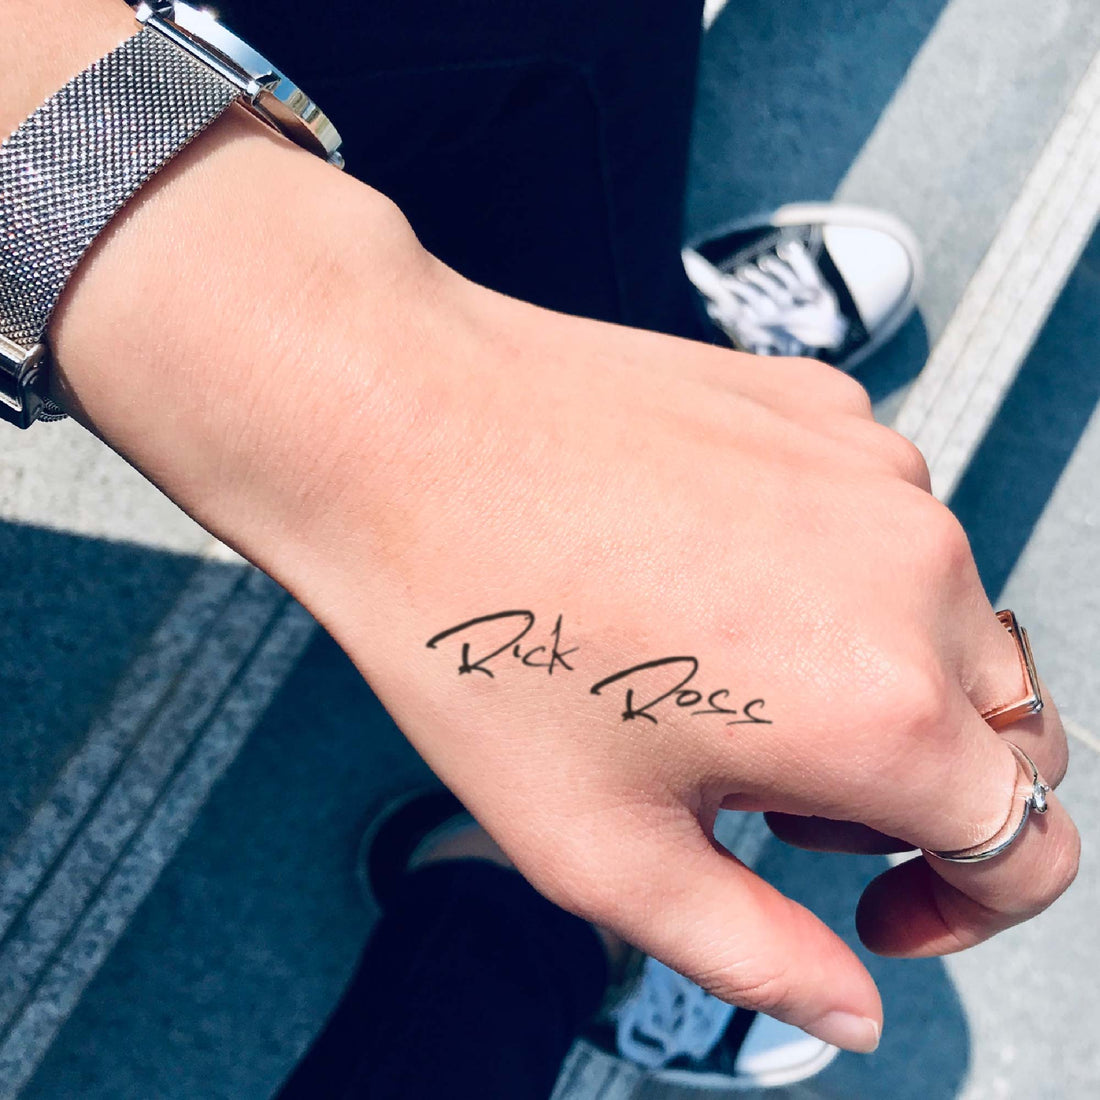 Rick Ross custom temporary tattoo sticker design idea inspiration meanings removal arm wrist hand words font name signature calligraphy lyrics tour concert outfits merch accessory gift souvenir costumes wear dress up code